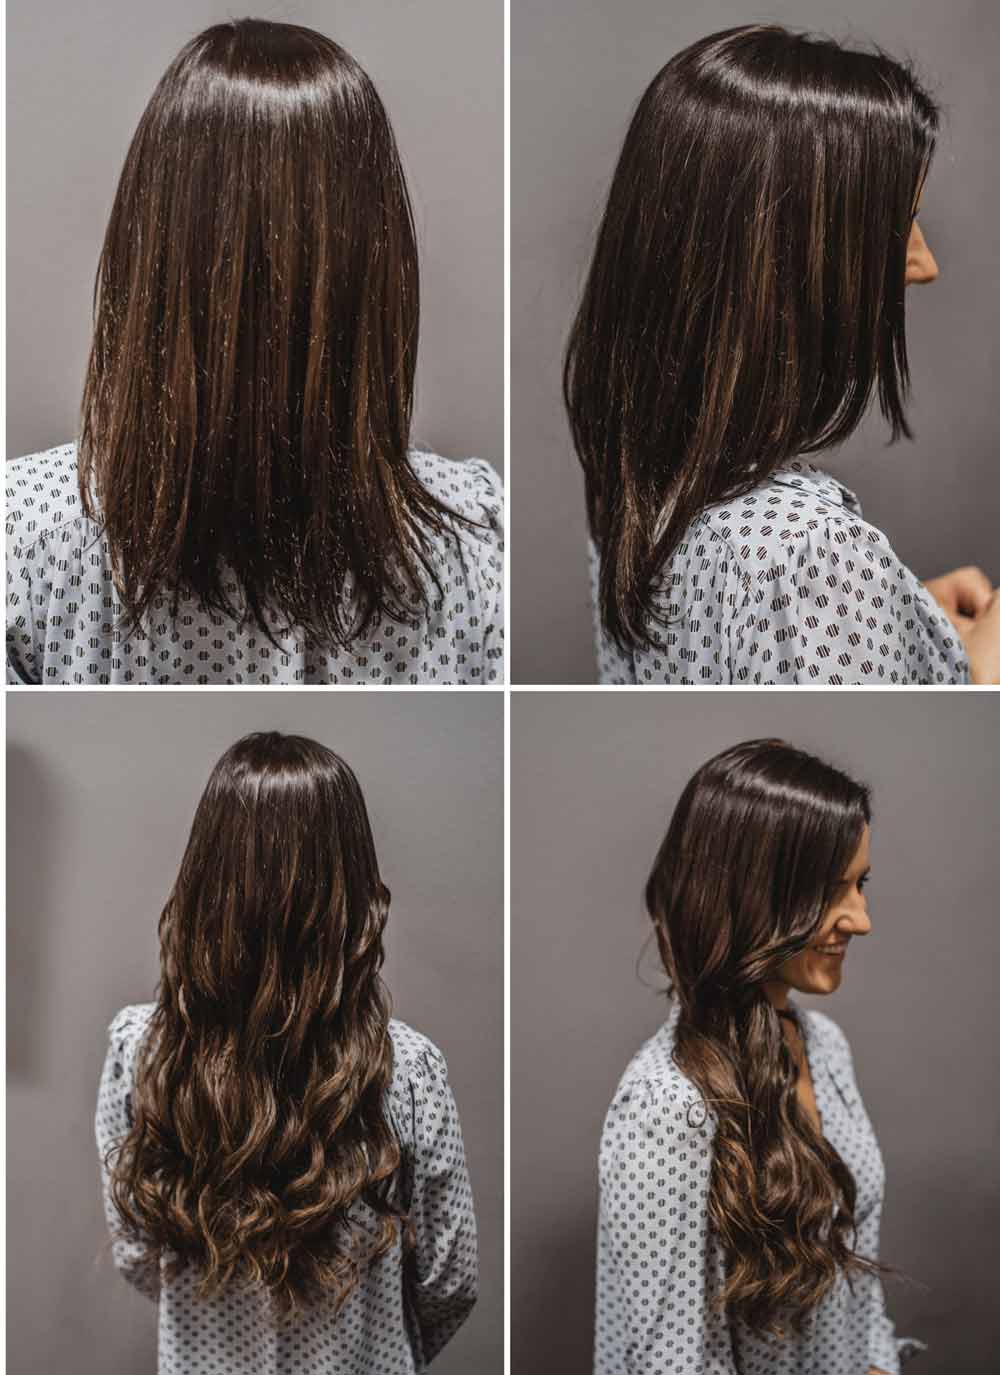 Layer your extensions